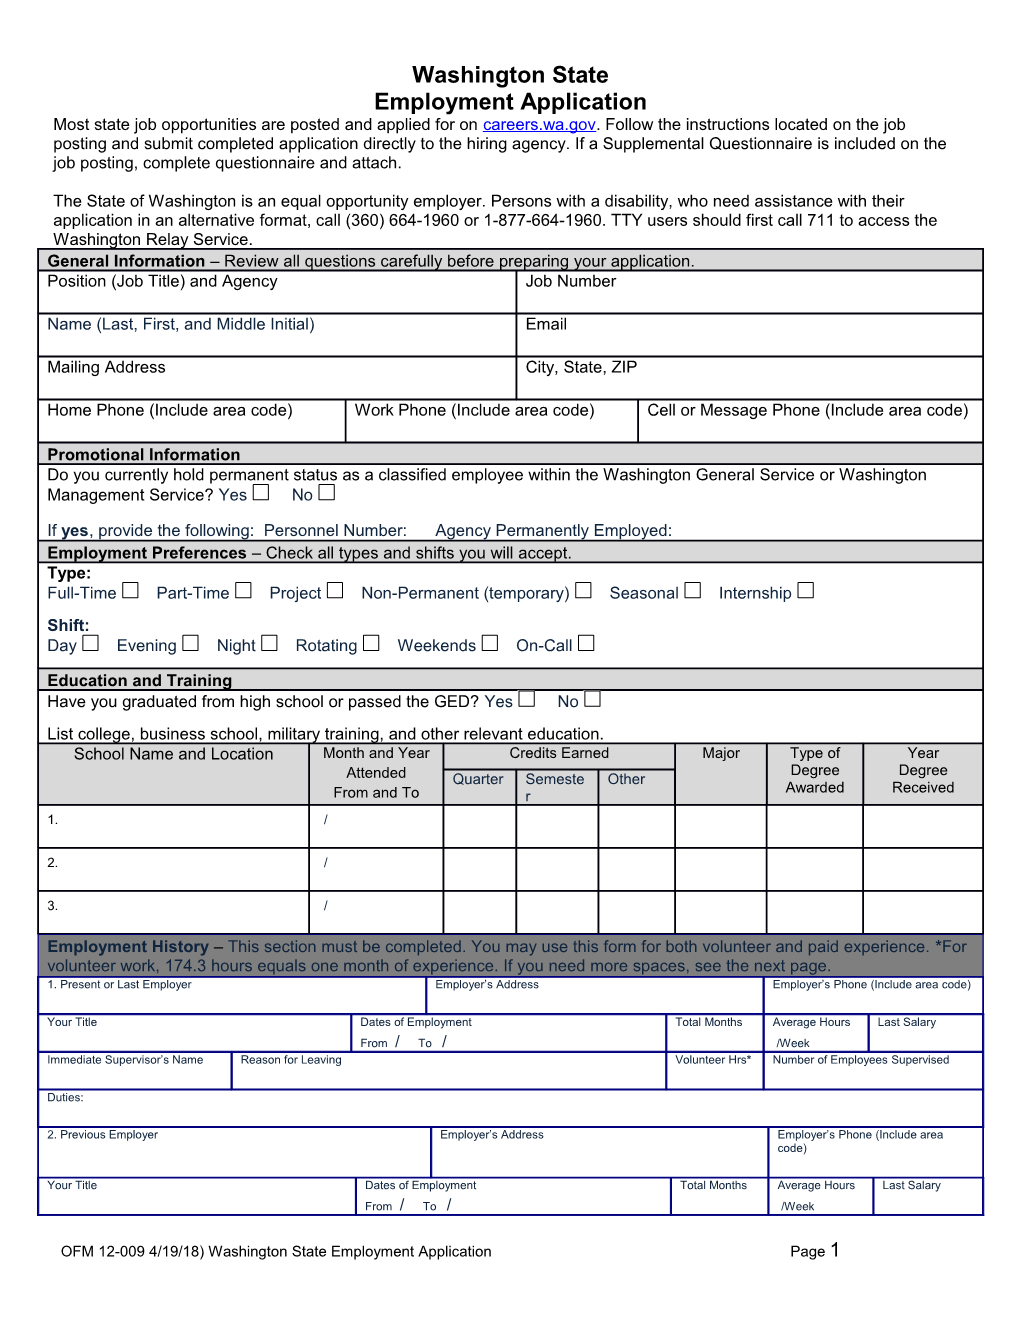 Application for State Jobs